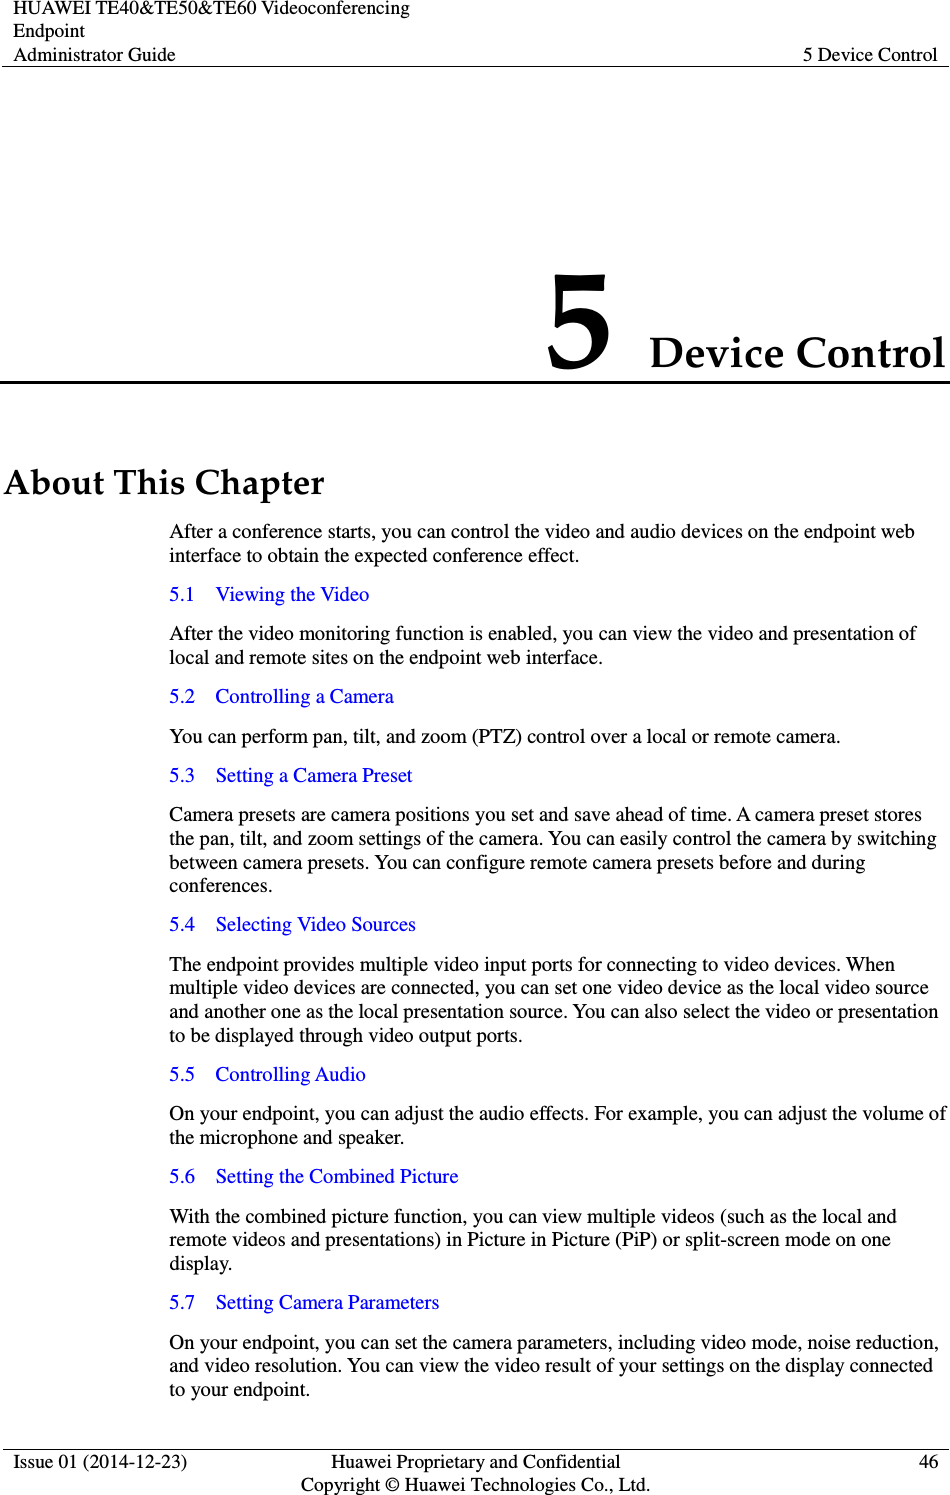 HUAWEI TE40&amp;TE50&amp;TE60 Videoconferencing Endpoint Administrator Guide  5 Device Control  Issue 01 (2014-12-23)  Huawei Proprietary and Confidential                                     Copyright © Huawei Technologies Co., Ltd. 46  5 Device Control About This Chapter After a conference starts, you can control the video and audio devices on the endpoint web interface to obtain the expected conference effect. 5.1    Viewing the Video After the video monitoring function is enabled, you can view the video and presentation of local and remote sites on the endpoint web interface. 5.2    Controlling a Camera You can perform pan, tilt, and zoom (PTZ) control over a local or remote camera. 5.3    Setting a Camera Preset Camera presets are camera positions you set and save ahead of time. A camera preset stores the pan, tilt, and zoom settings of the camera. You can easily control the camera by switching between camera presets. You can configure remote camera presets before and during conferences.   5.4    Selecting Video Sources The endpoint provides multiple video input ports for connecting to video devices. When multiple video devices are connected, you can set one video device as the local video source and another one as the local presentation source. You can also select the video or presentation to be displayed through video output ports. 5.5    Controlling Audio On your endpoint, you can adjust the audio effects. For example, you can adjust the volume of the microphone and speaker. 5.6    Setting the Combined Picture With the combined picture function, you can view multiple videos (such as the local and remote videos and presentations) in Picture in Picture (PiP) or split-screen mode on one display. 5.7    Setting Camera Parameters On your endpoint, you can set the camera parameters, including video mode, noise reduction, and video resolution. You can view the video result of your settings on the display connected to your endpoint.   